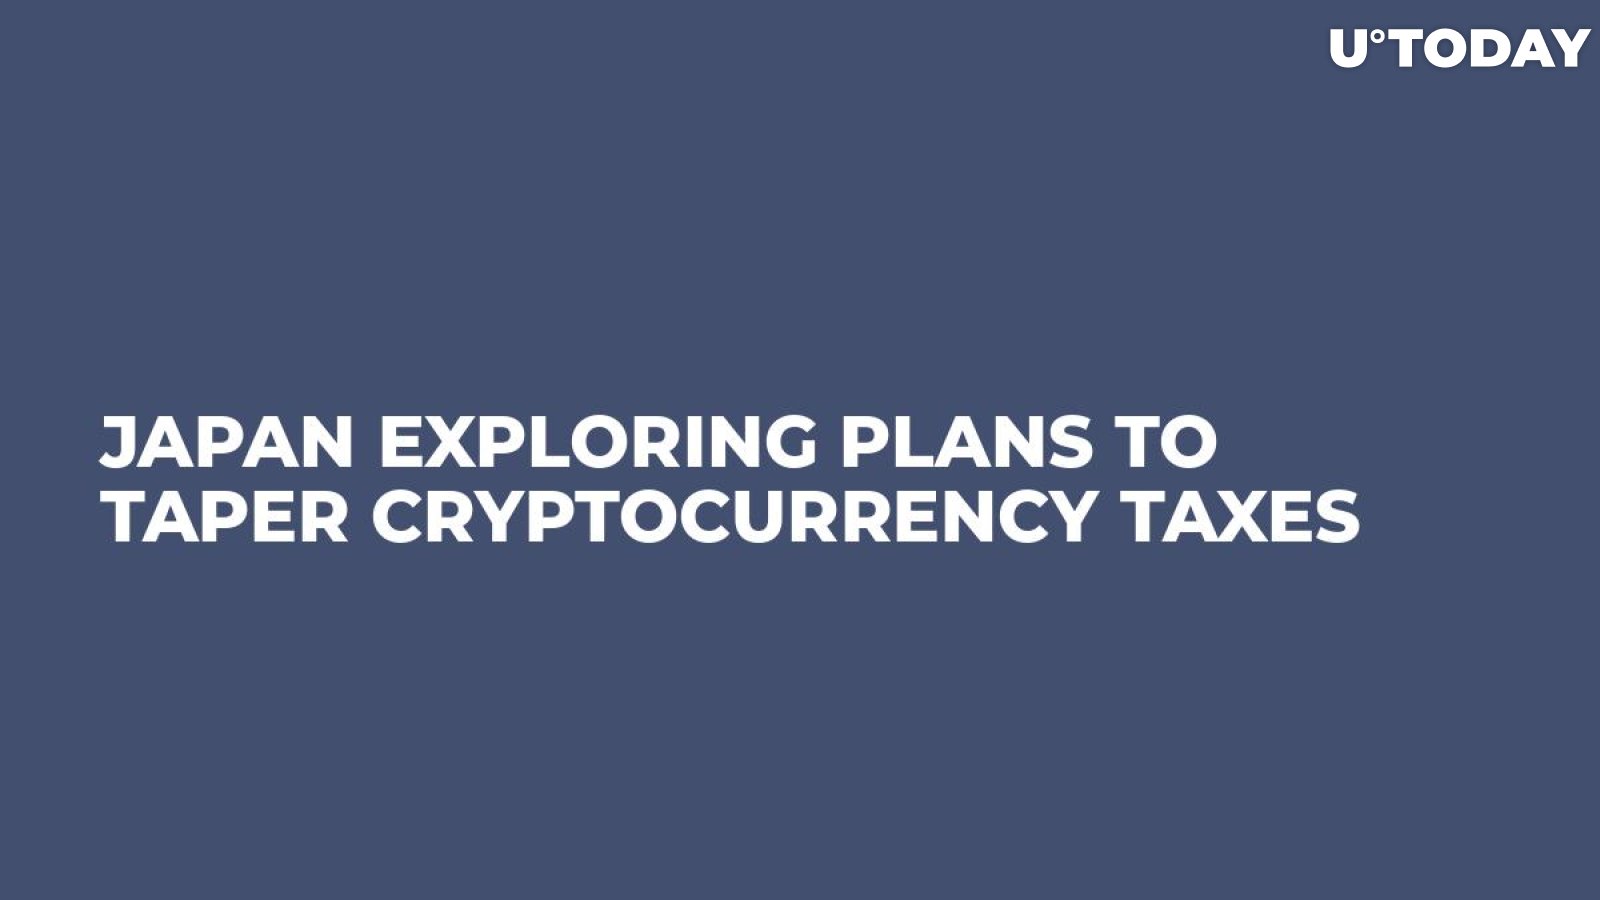 Japan Exploring Plans to Taper Cryptocurrency Taxes